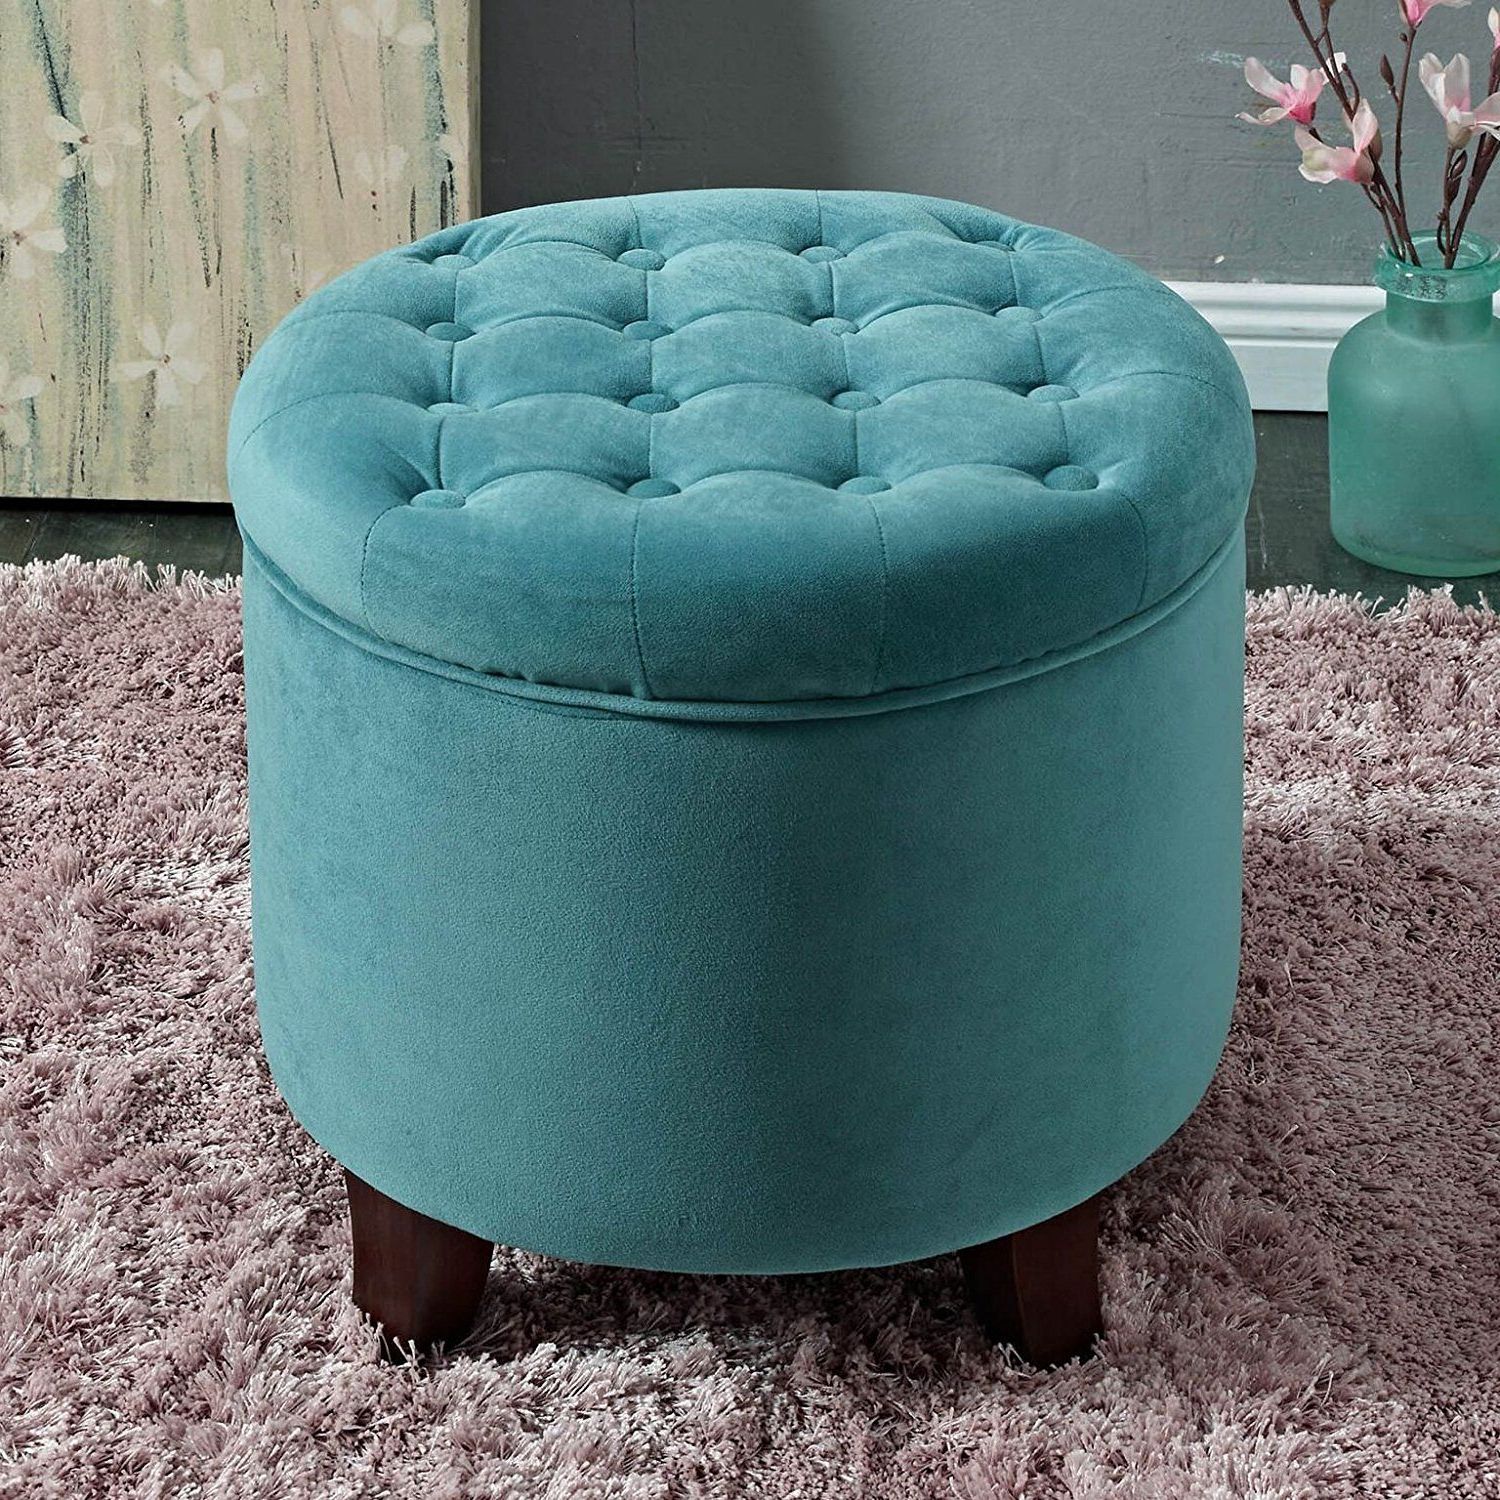 Brown Fabric Tufted Surfboard Ottomans Pertaining To Famous Amazon: Kinfine Velvet Tufted Round Storage Ottoman With Removable (View 4 of 10)